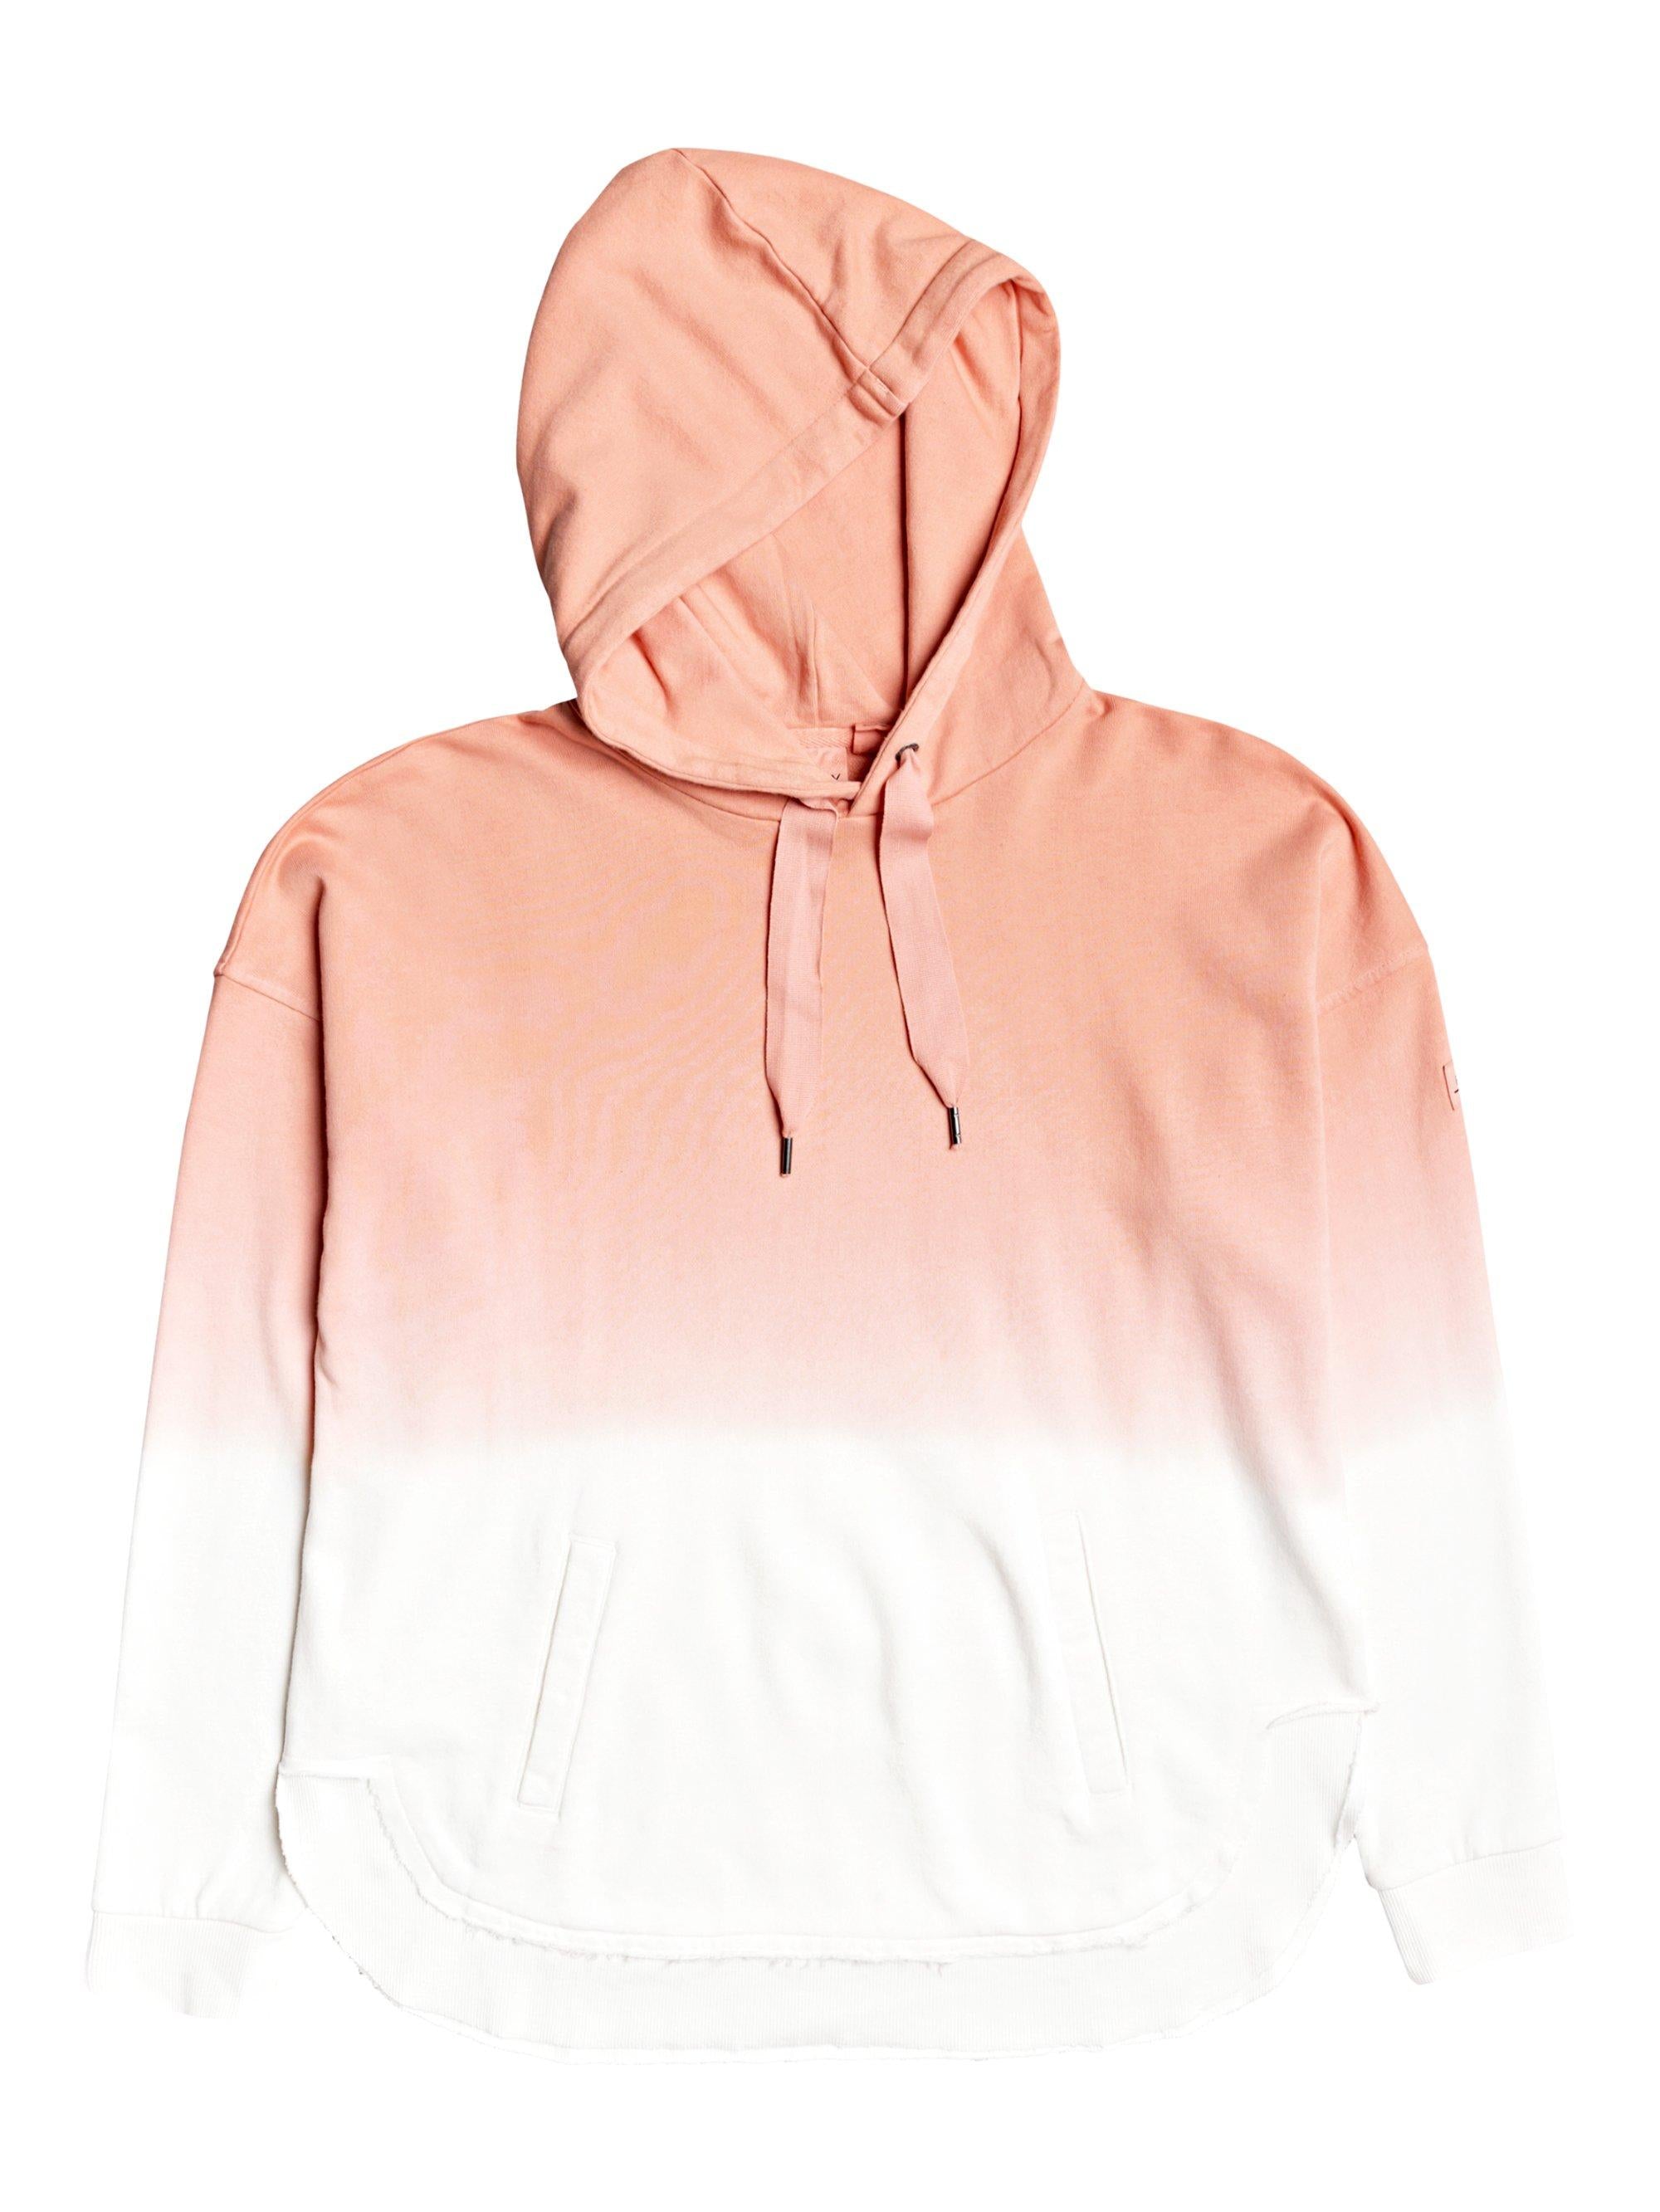 Roxy Time Has Come Poncho Hoodie - 88 Gear